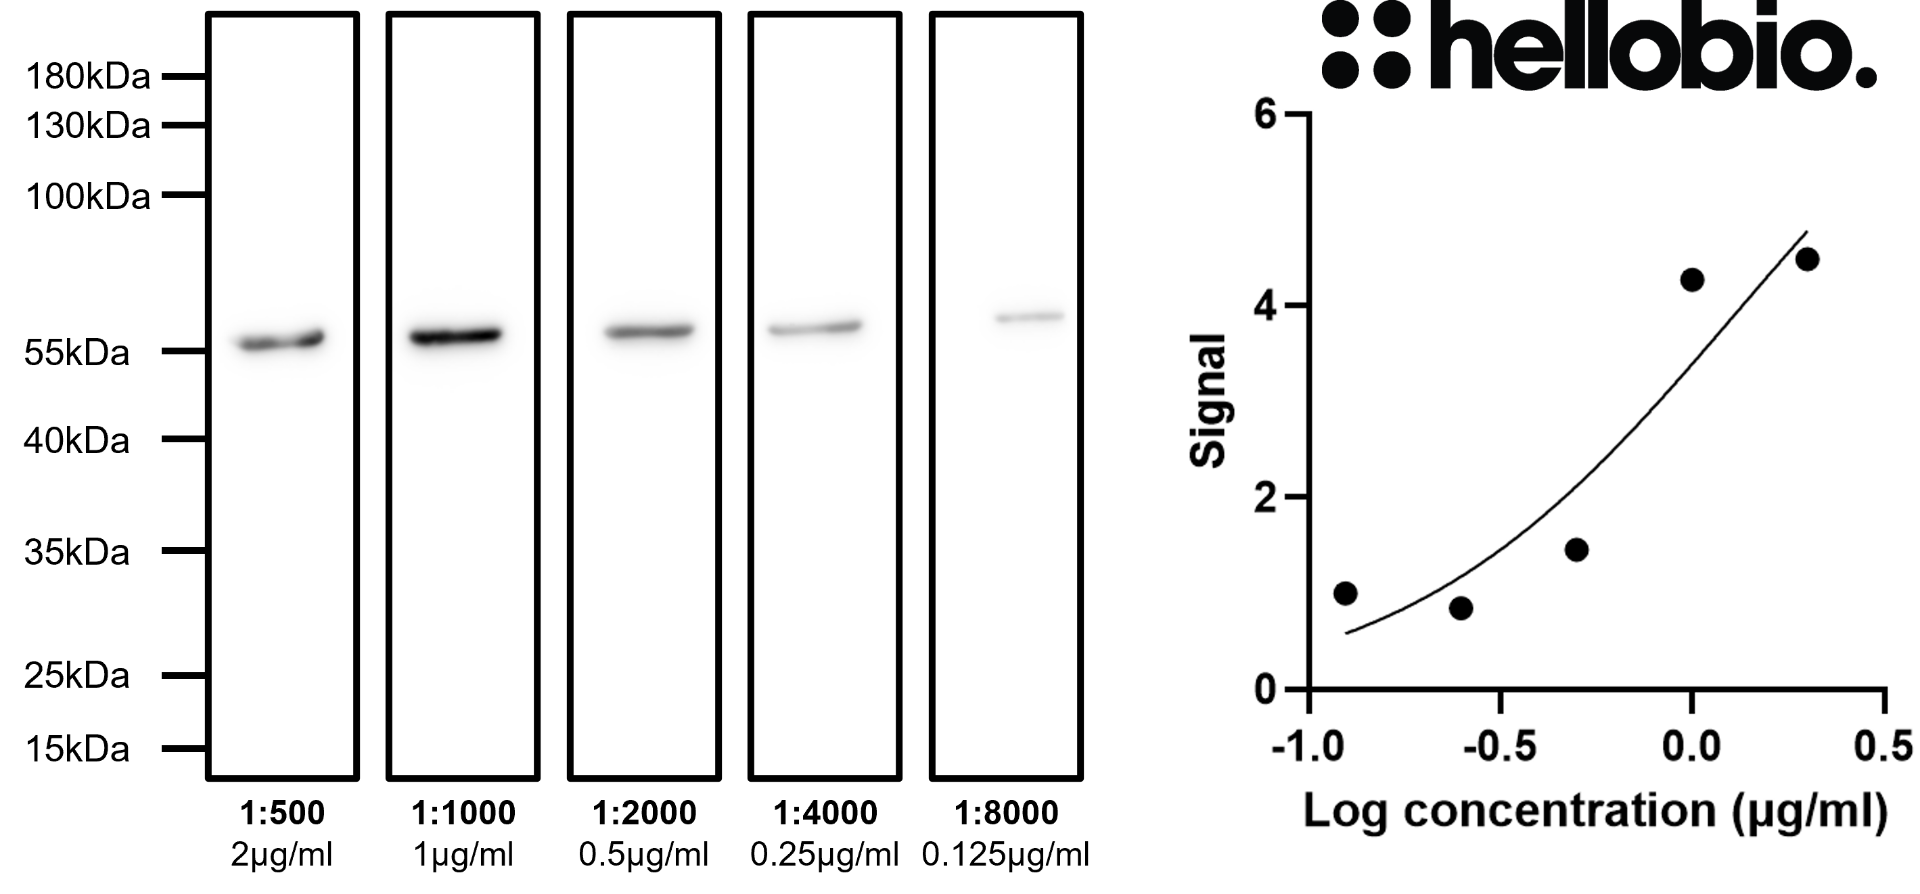 Figure 9. Concentration response of HB6639 staining in a rat brain cytosol preparation.